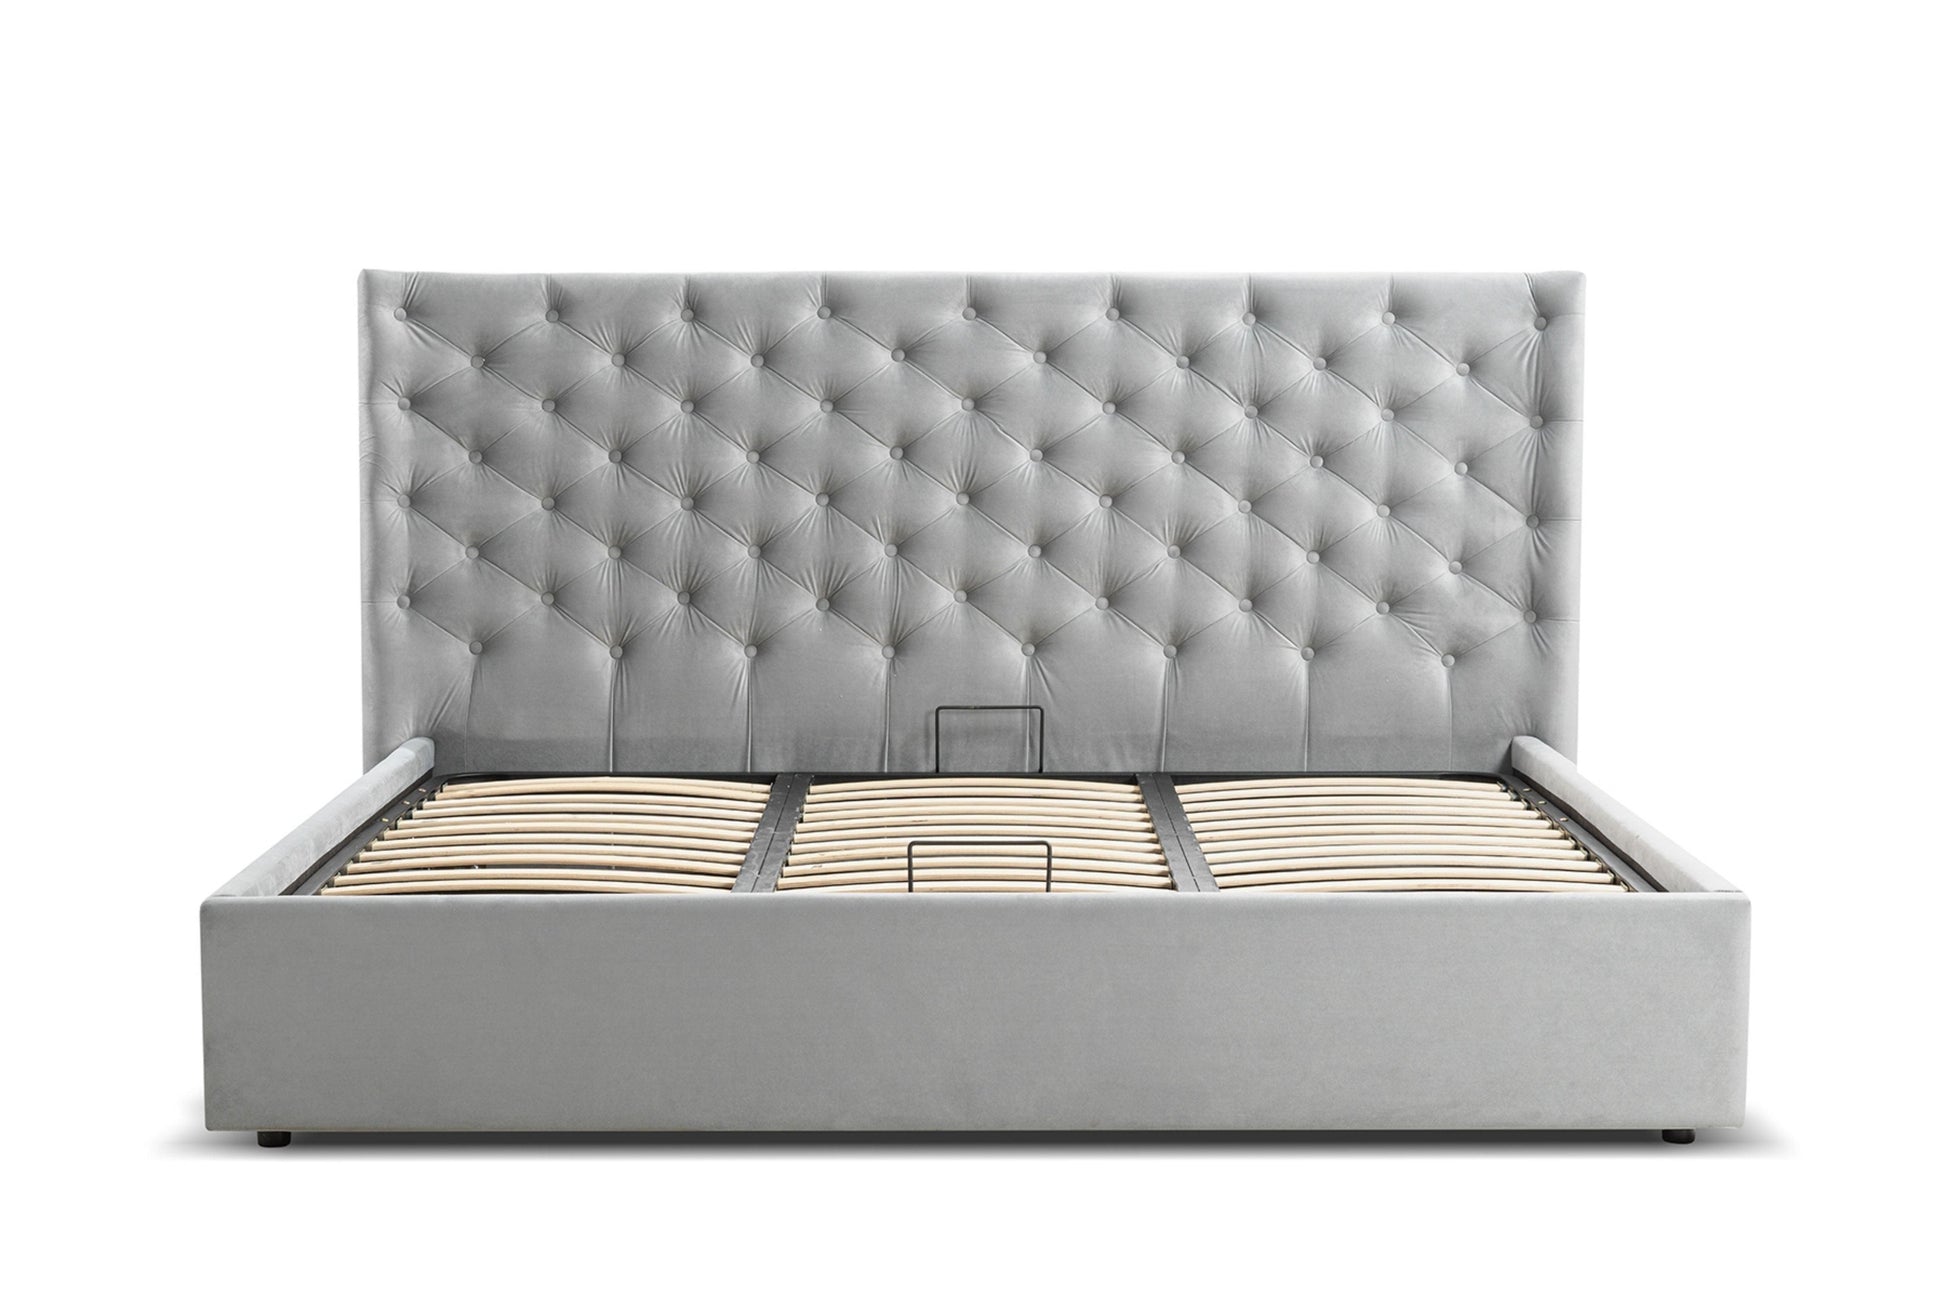 Parker King and Queen Bed Model CB-A100 - Venini Furniture 